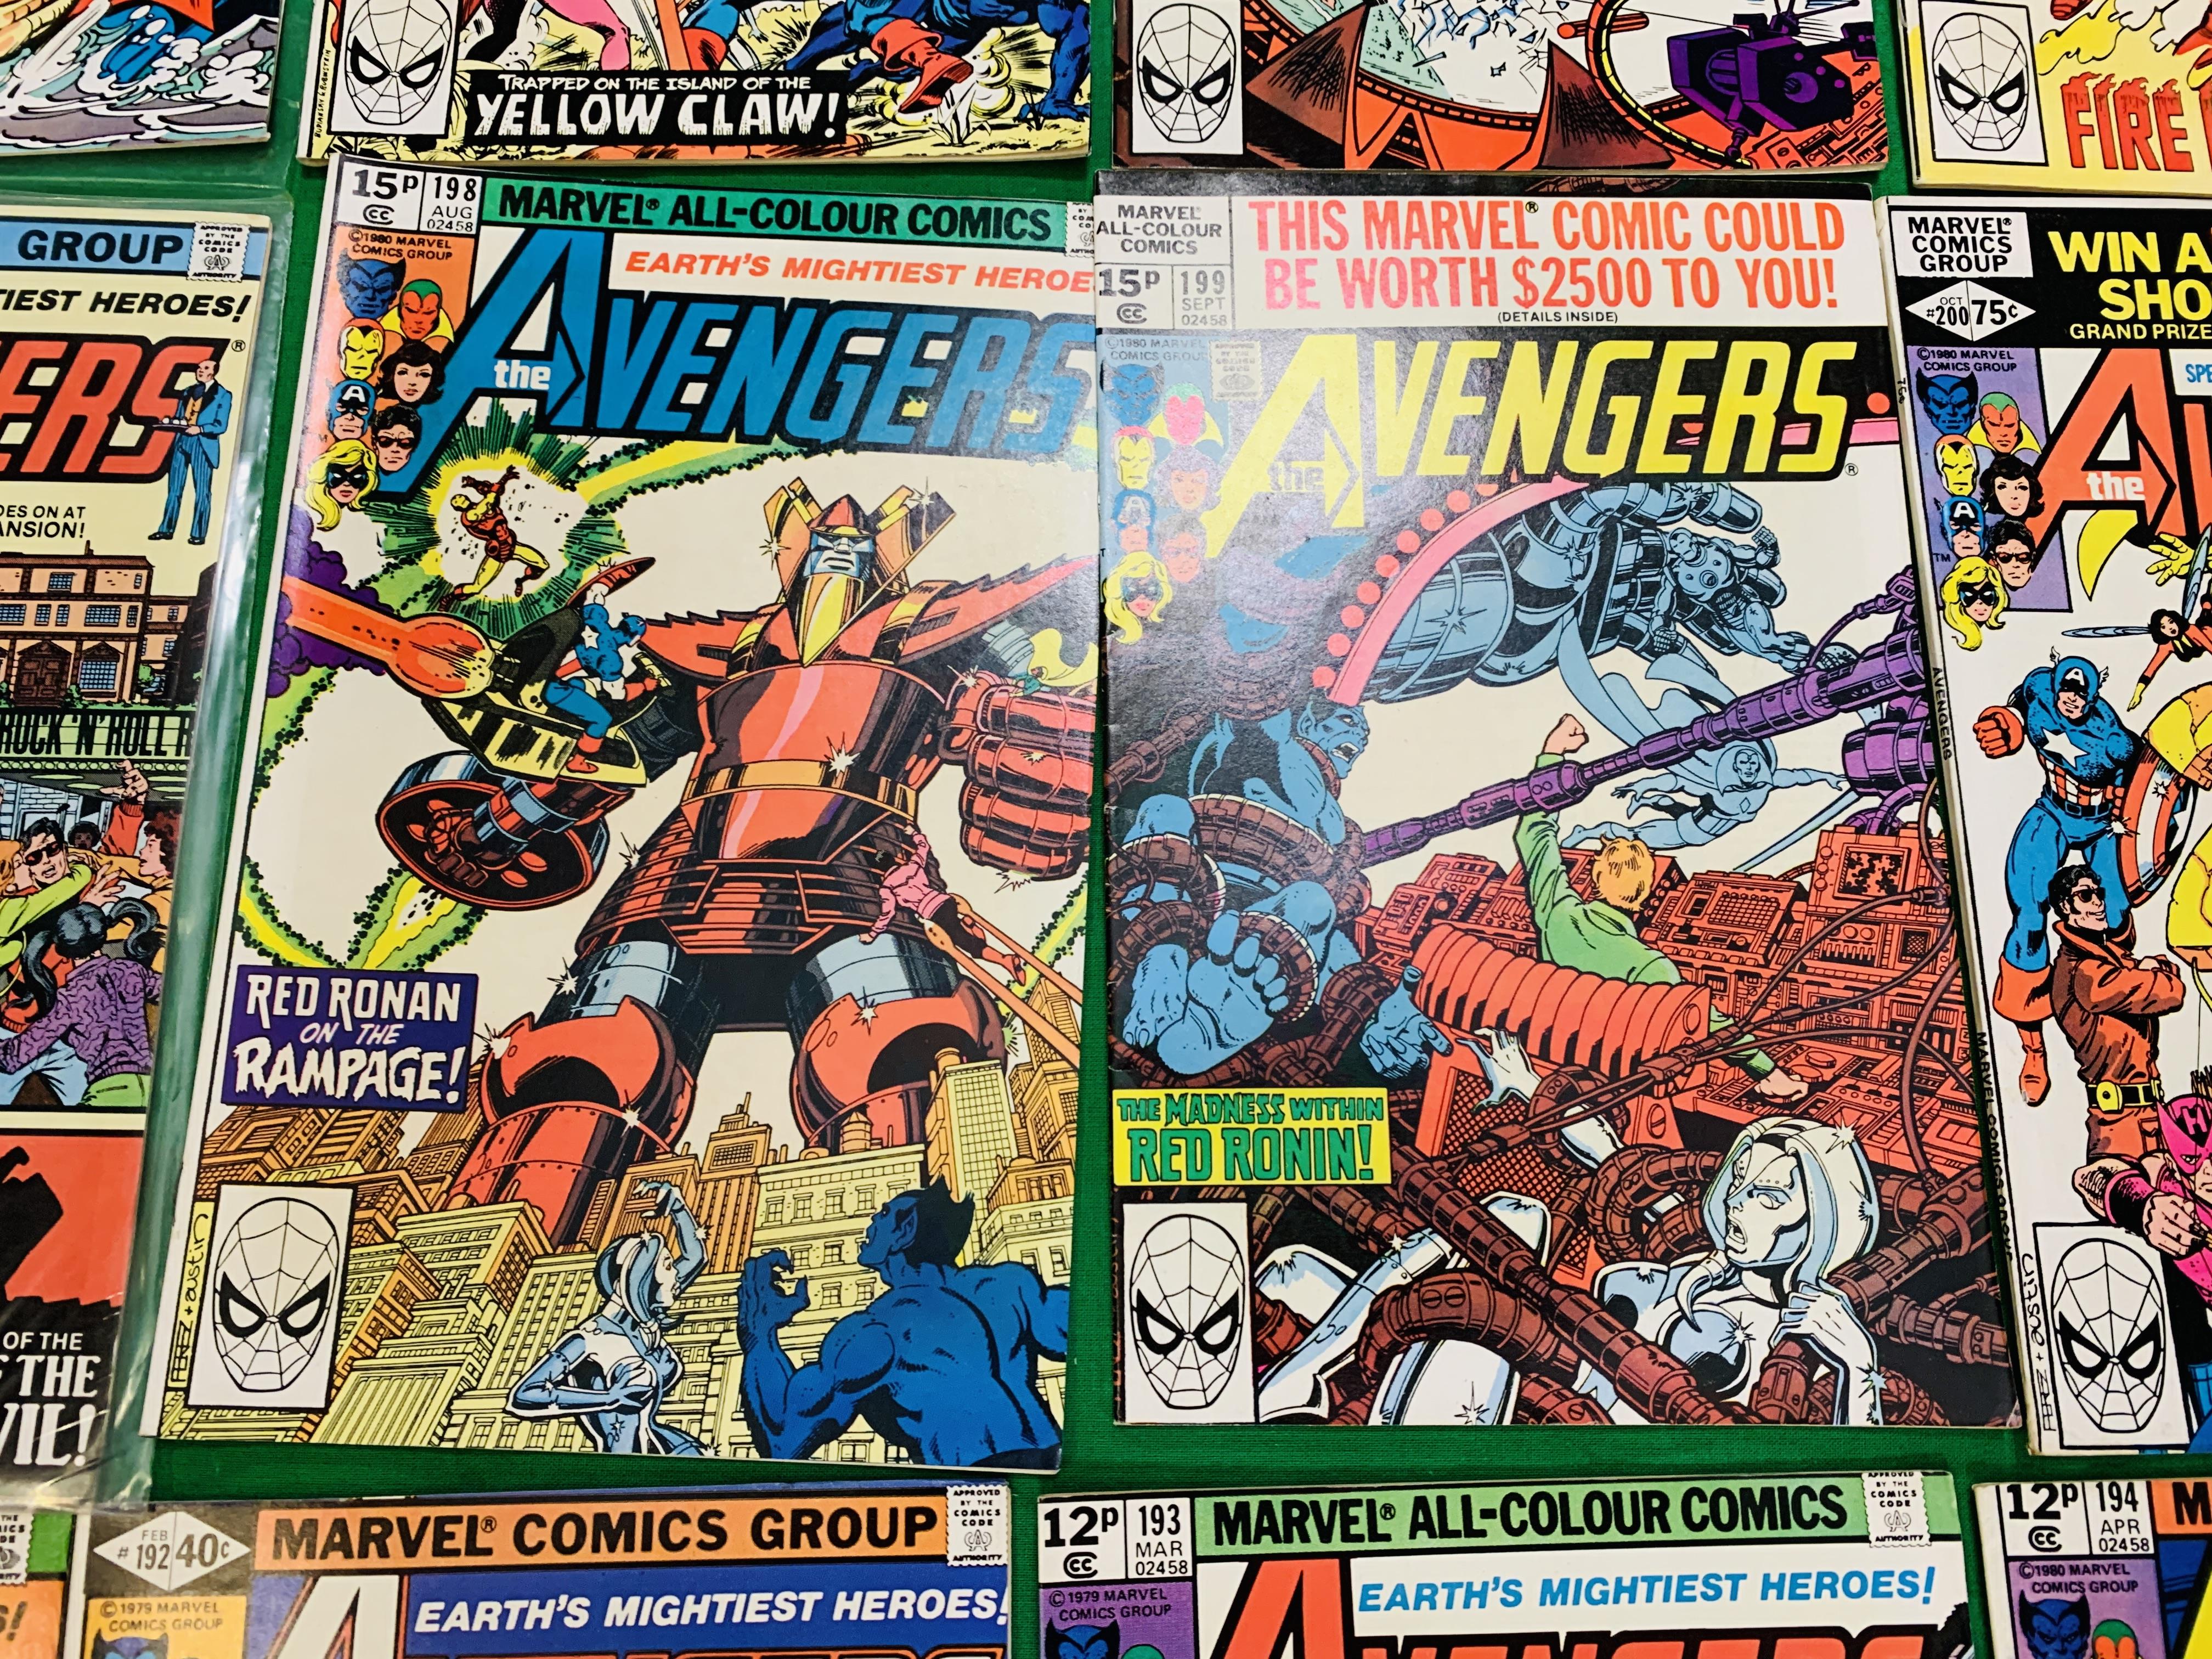 MARVEL COMICS THE AVENGERS NO. 101 - 299, MISSING ISSUES 103 AND 110. - Image 72 of 130